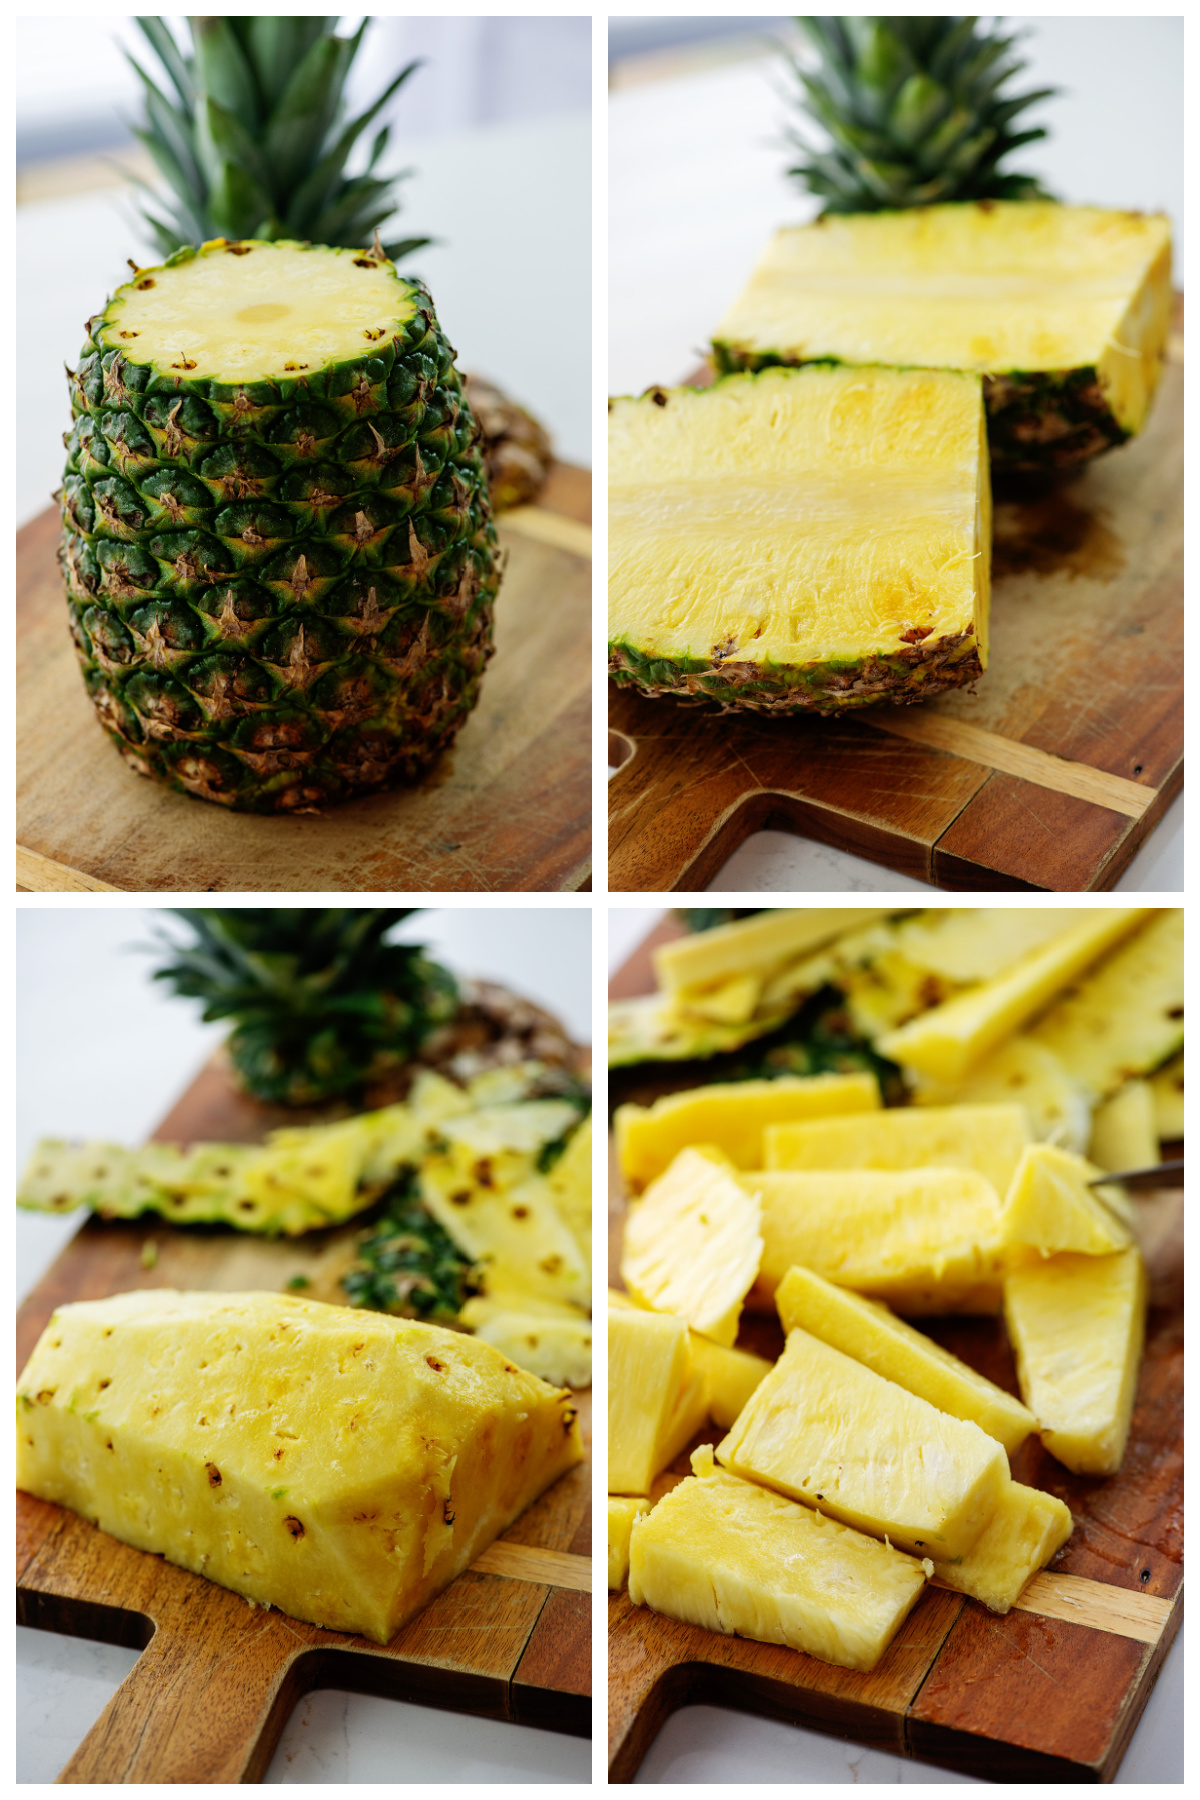 Collage of the steps in cutting a pineapple.